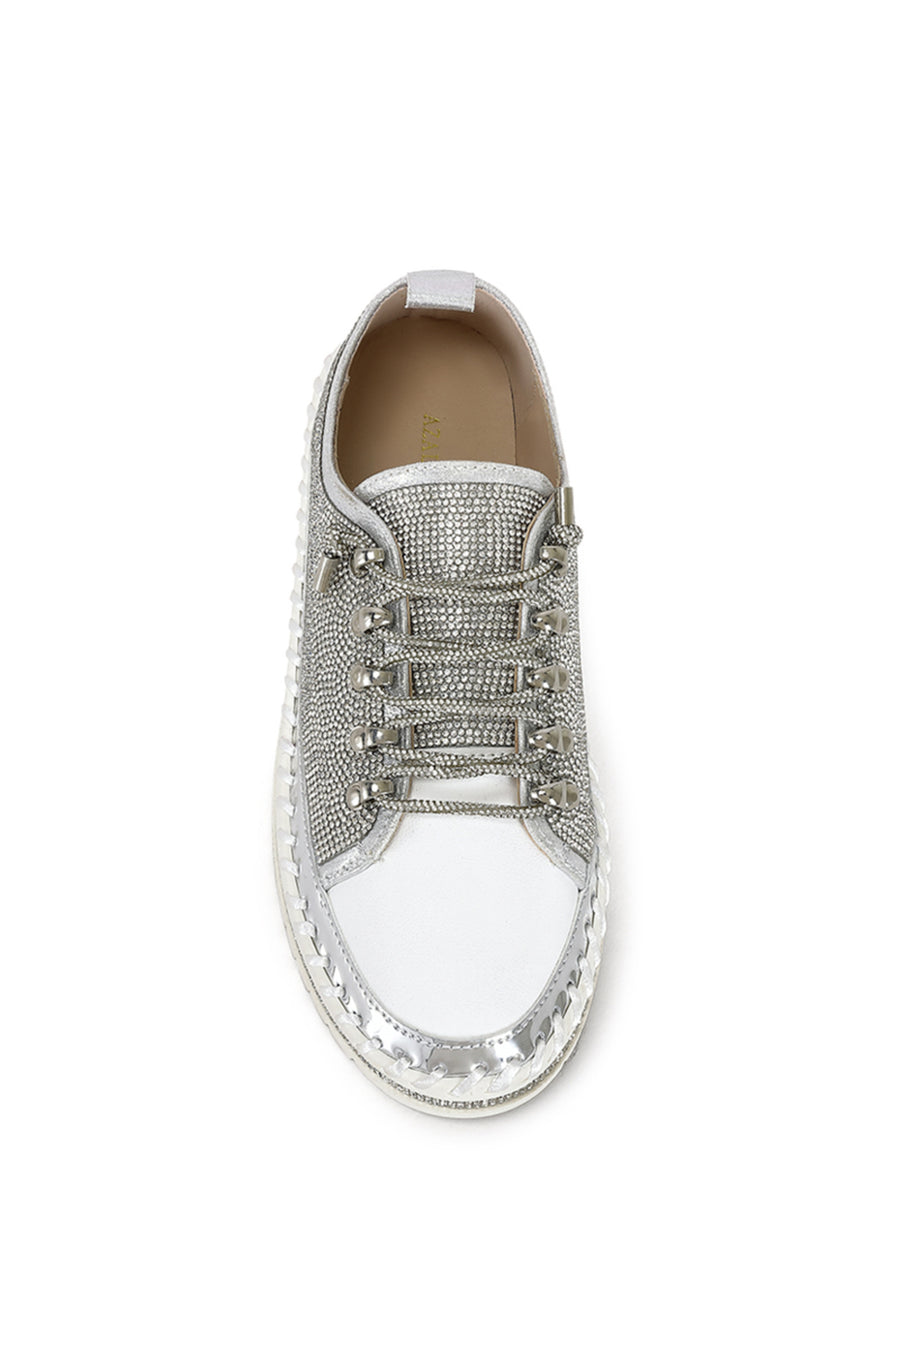 metallic silver lace up sneakers witha chunky white platform sole and crystal embellishments all over the upper